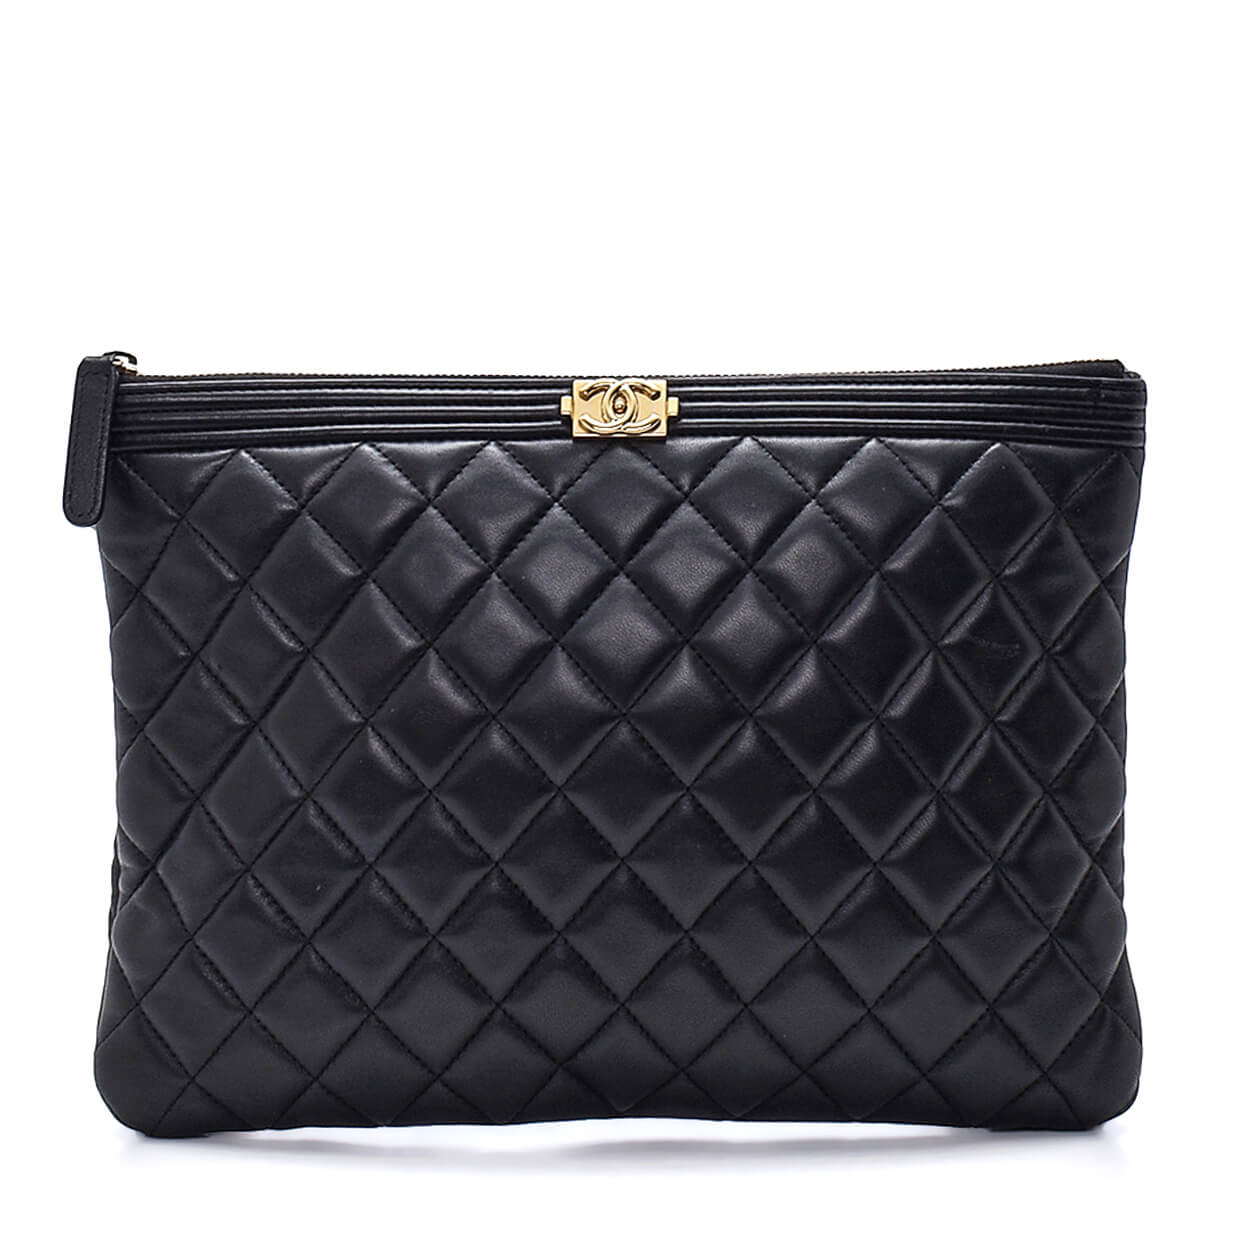 Chanel - Black Leather Boy O Case Quilted Clutch